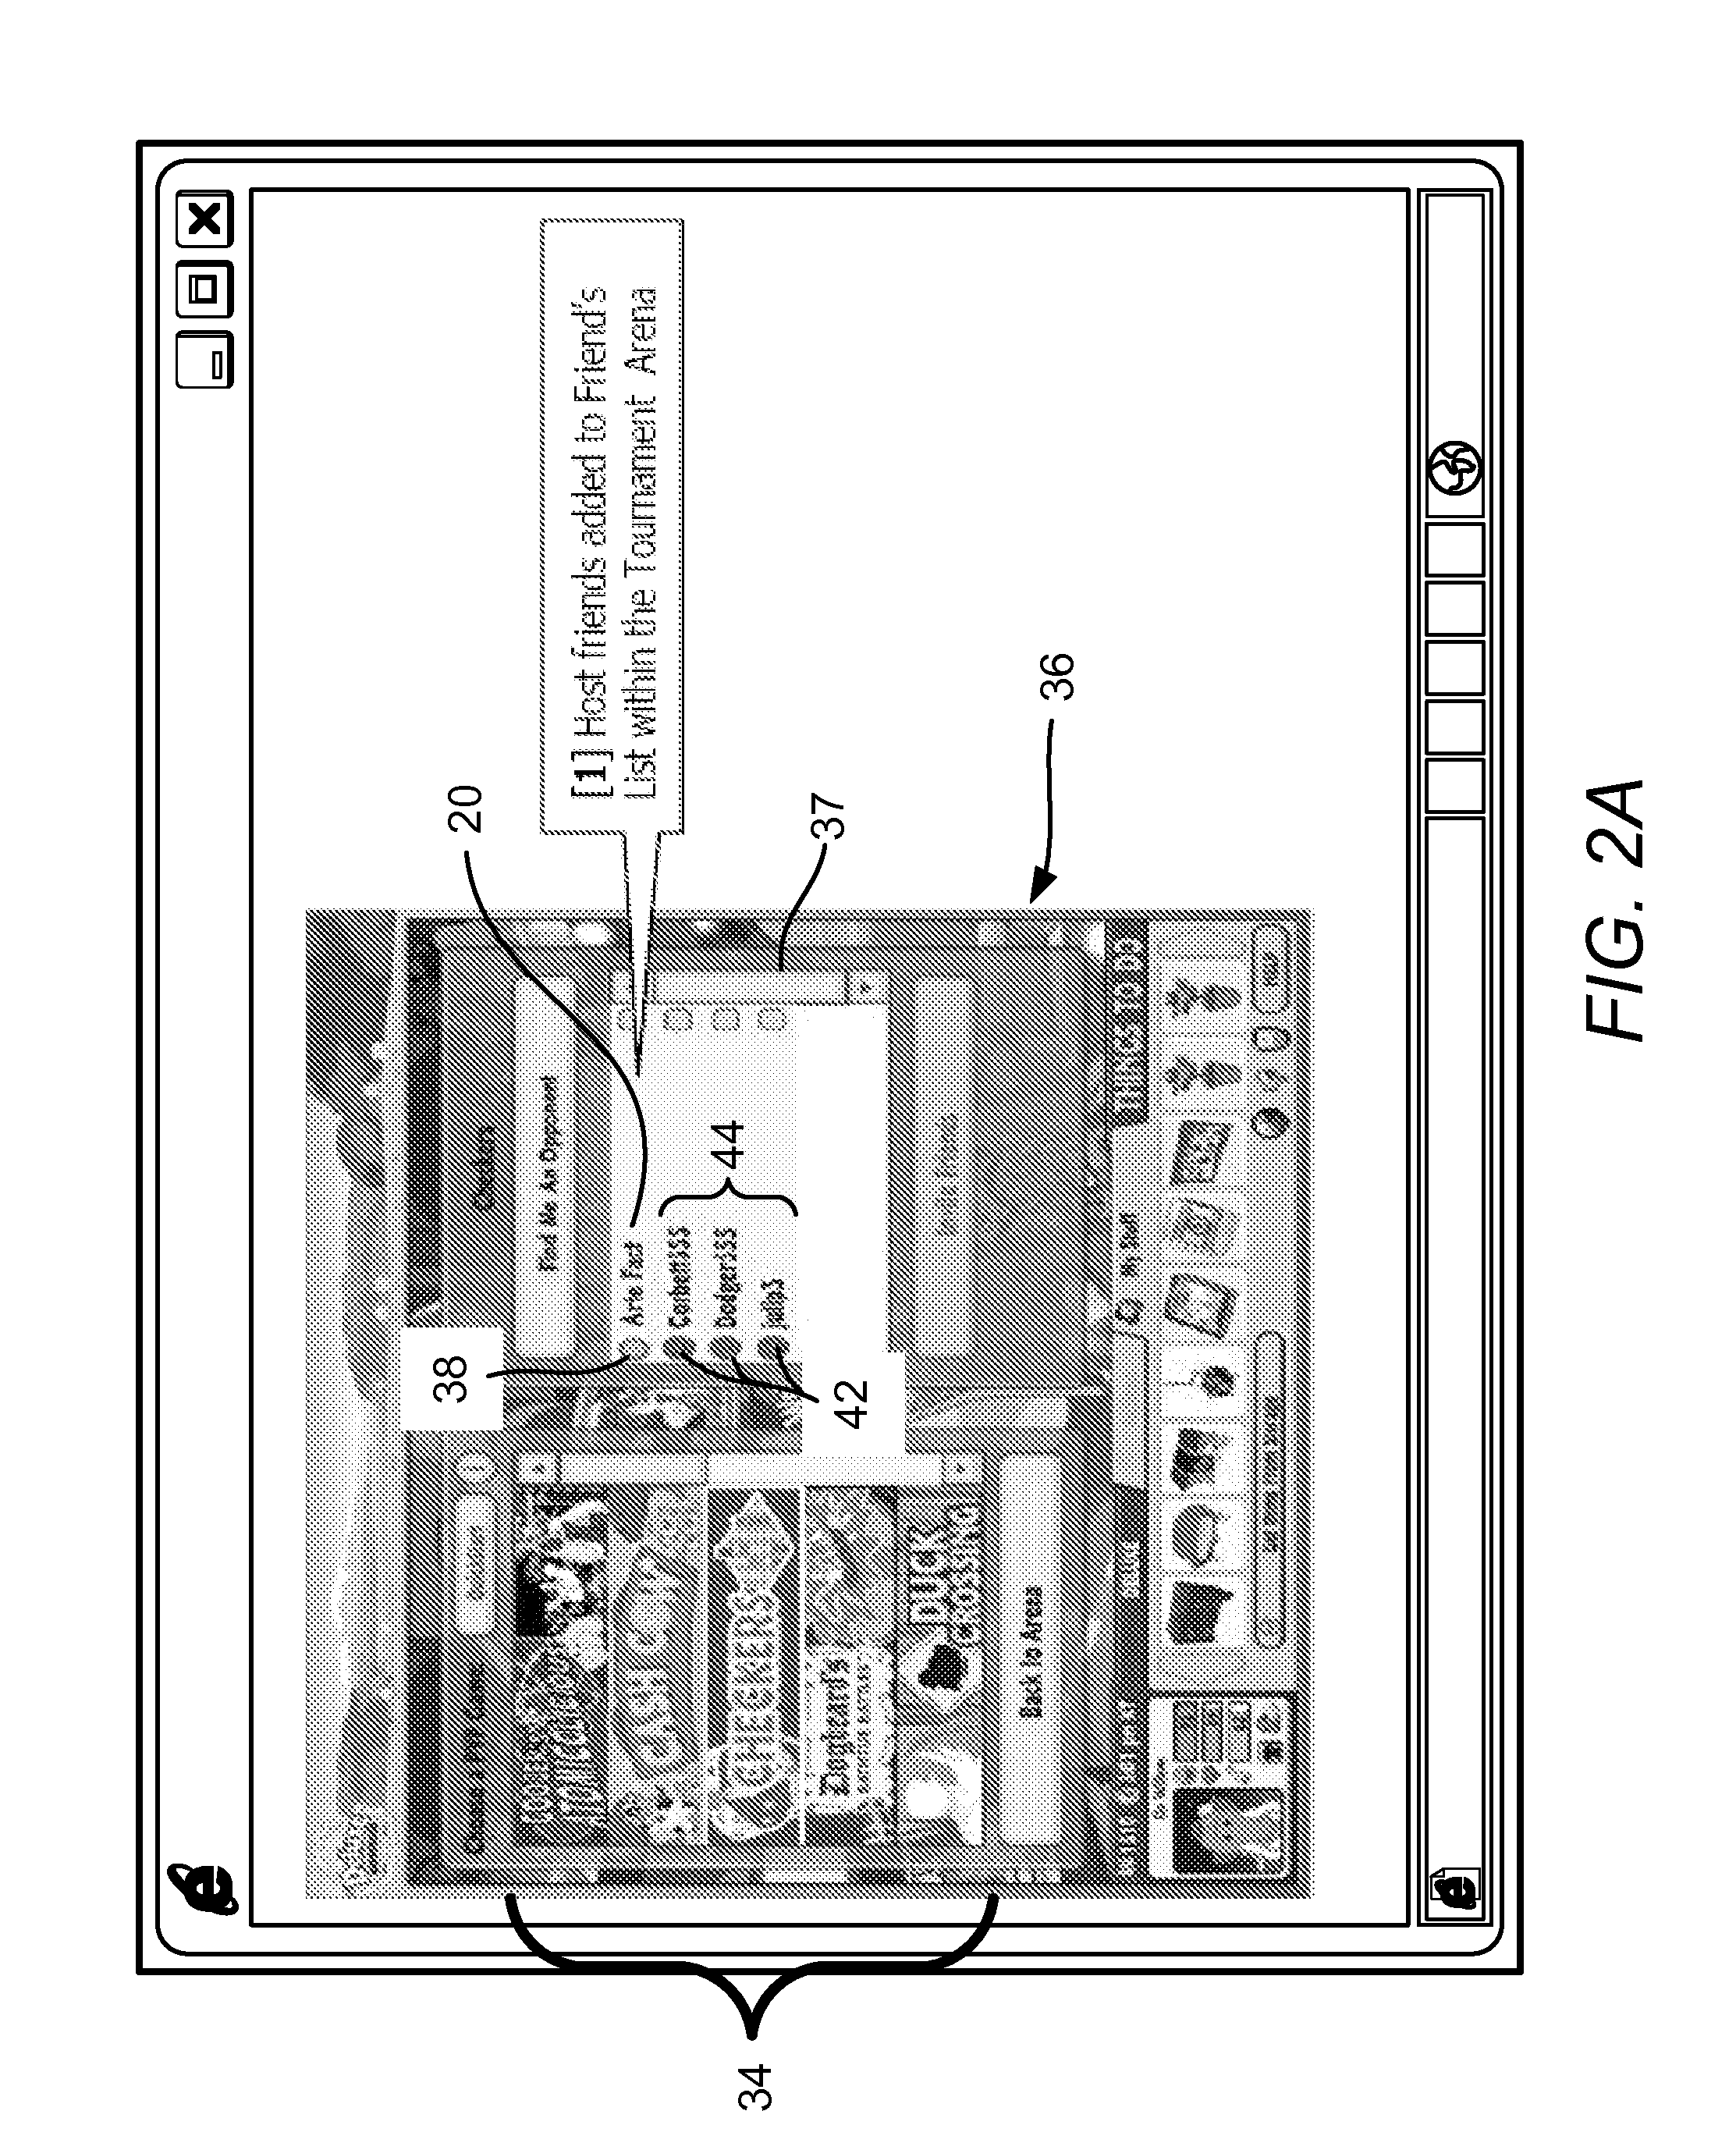 Method for virtual friendship and accessing restricted portions of virtual worlds